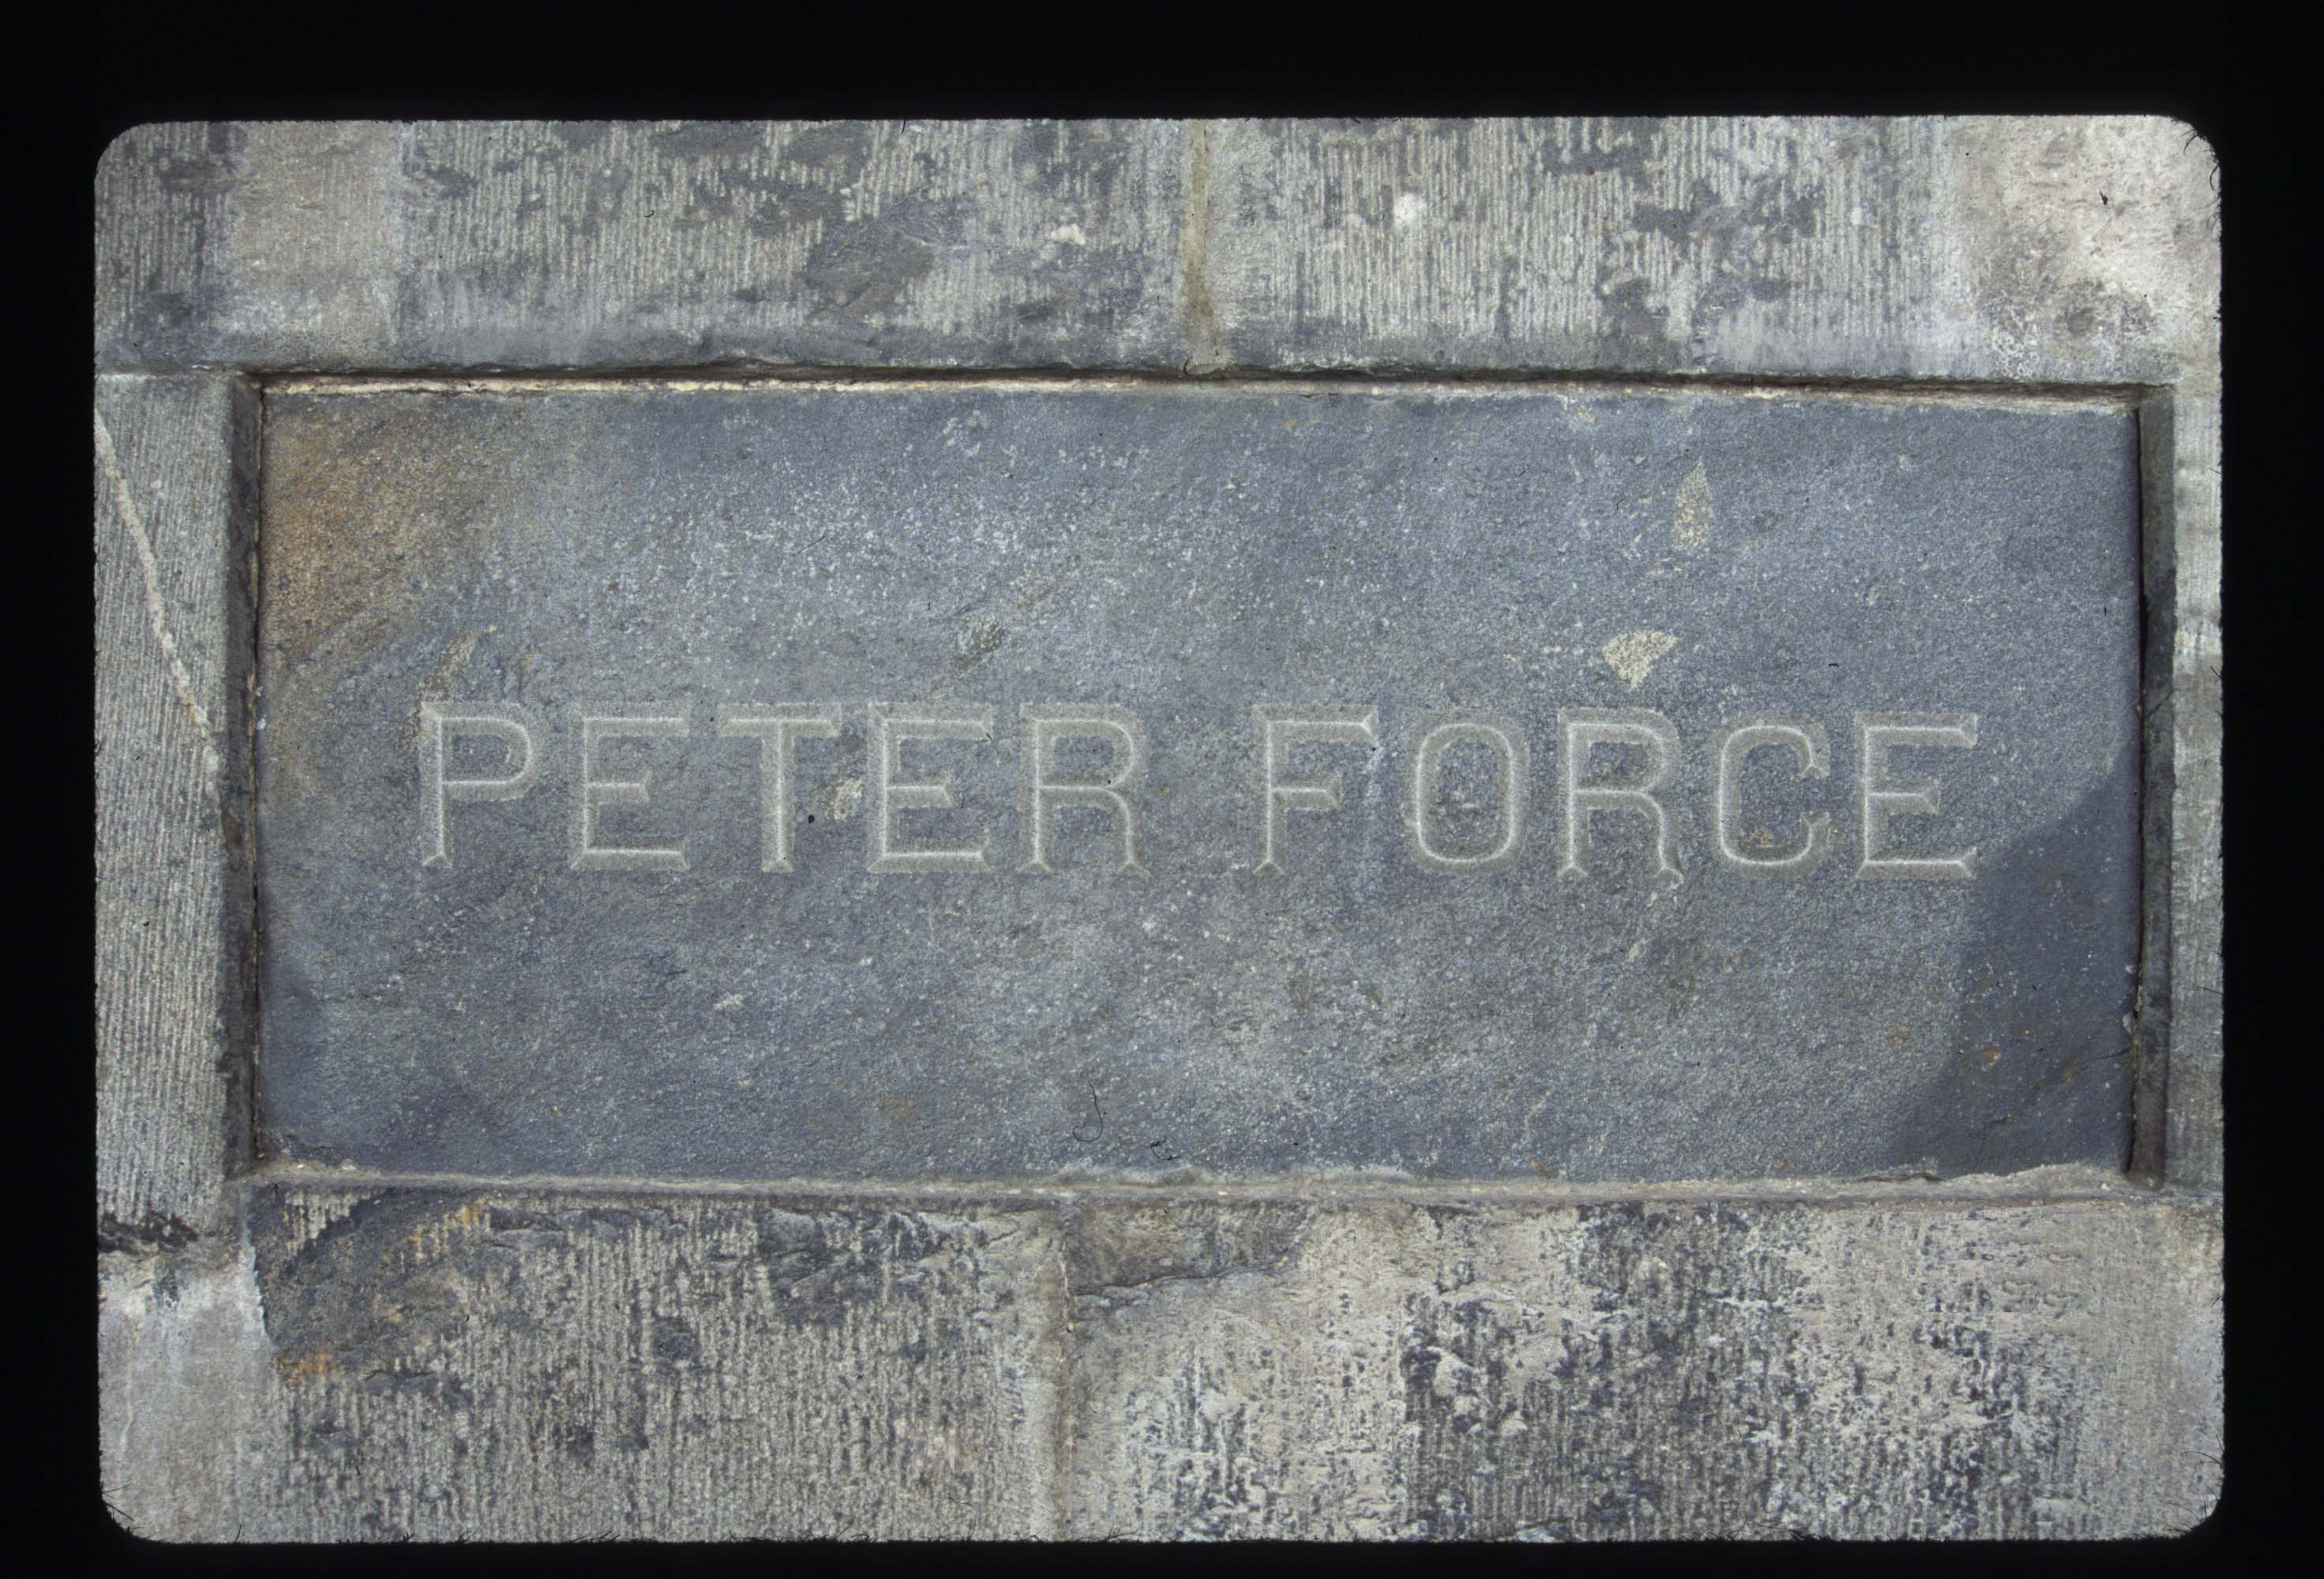 Peter Force